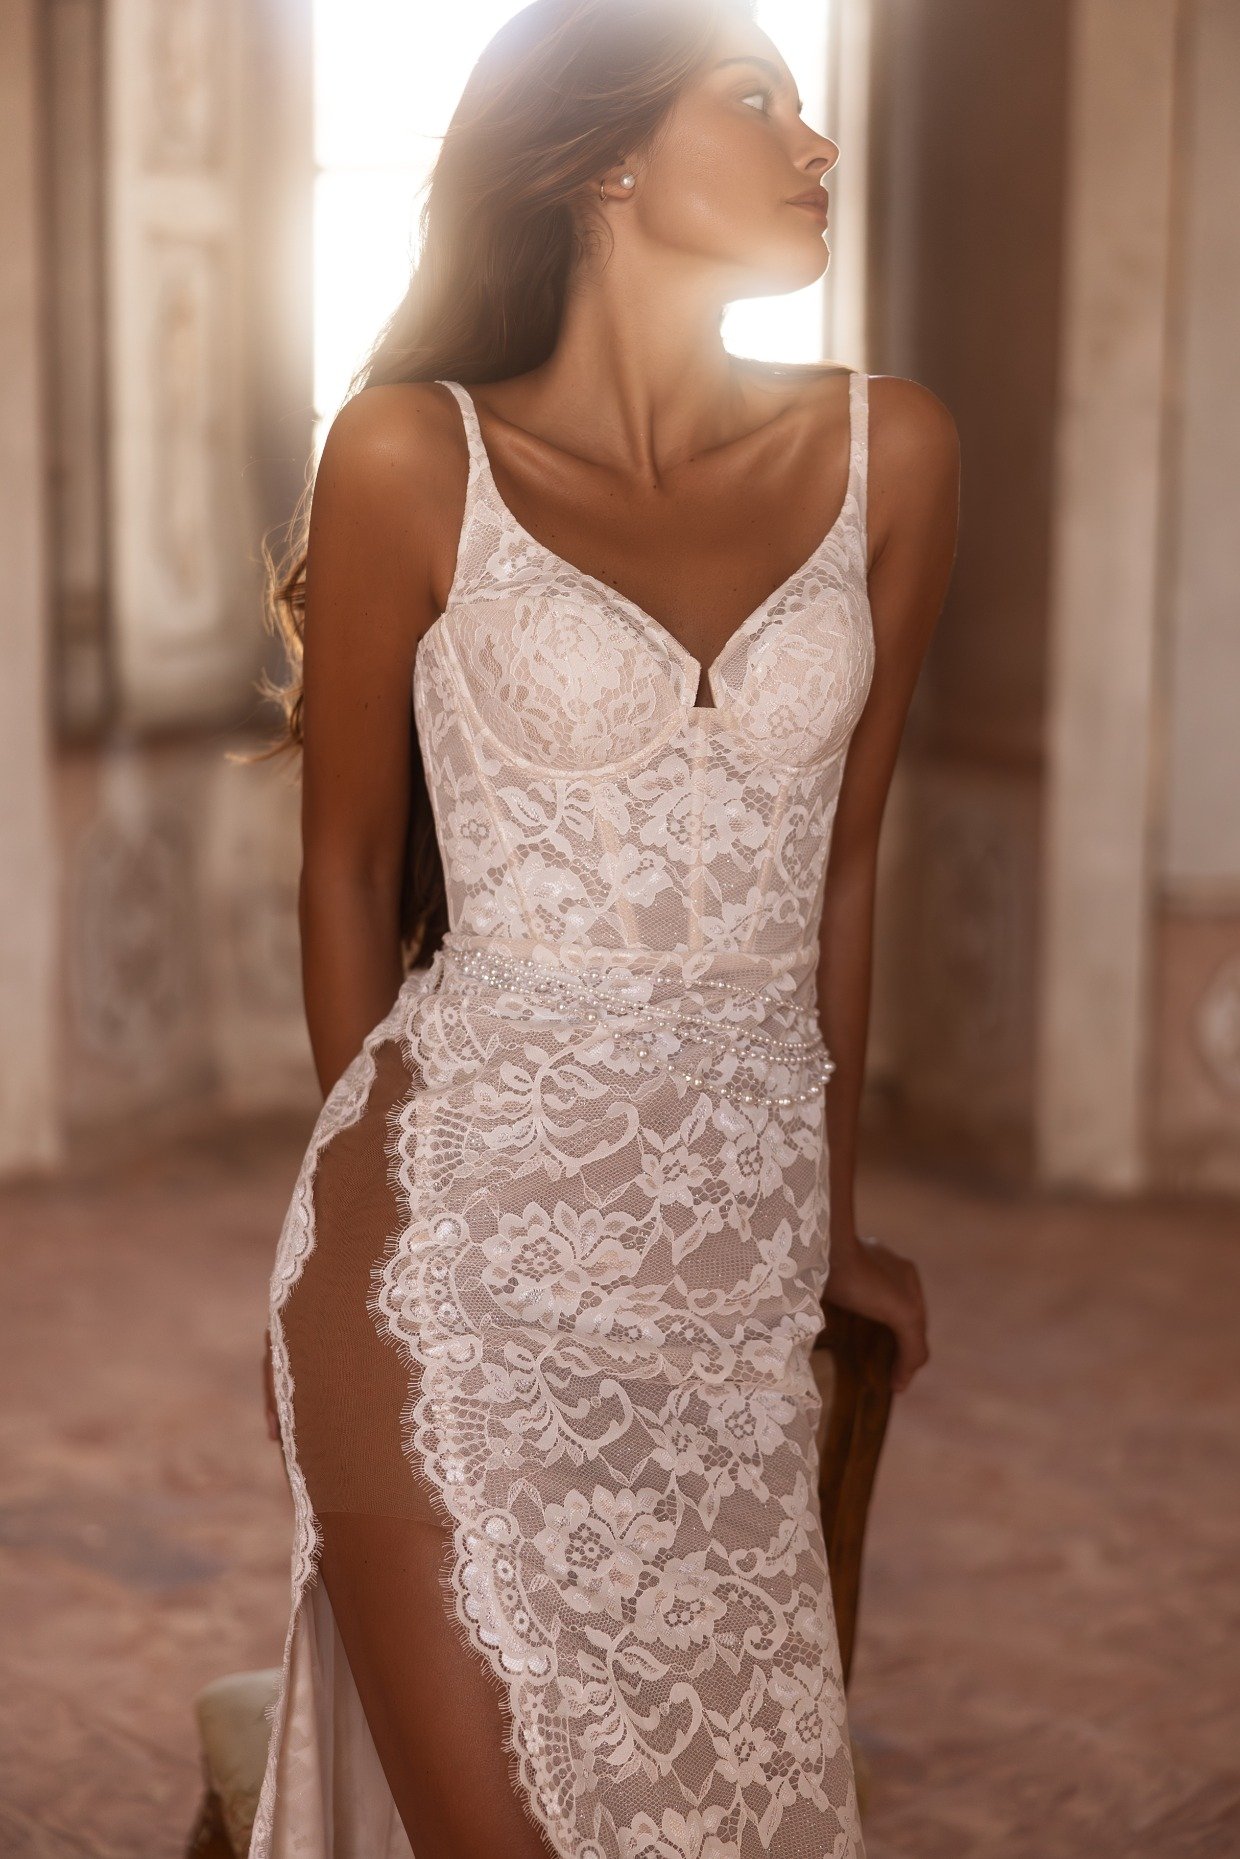 bra-top corset lace wedding dress with thigh high slit by Yedyna